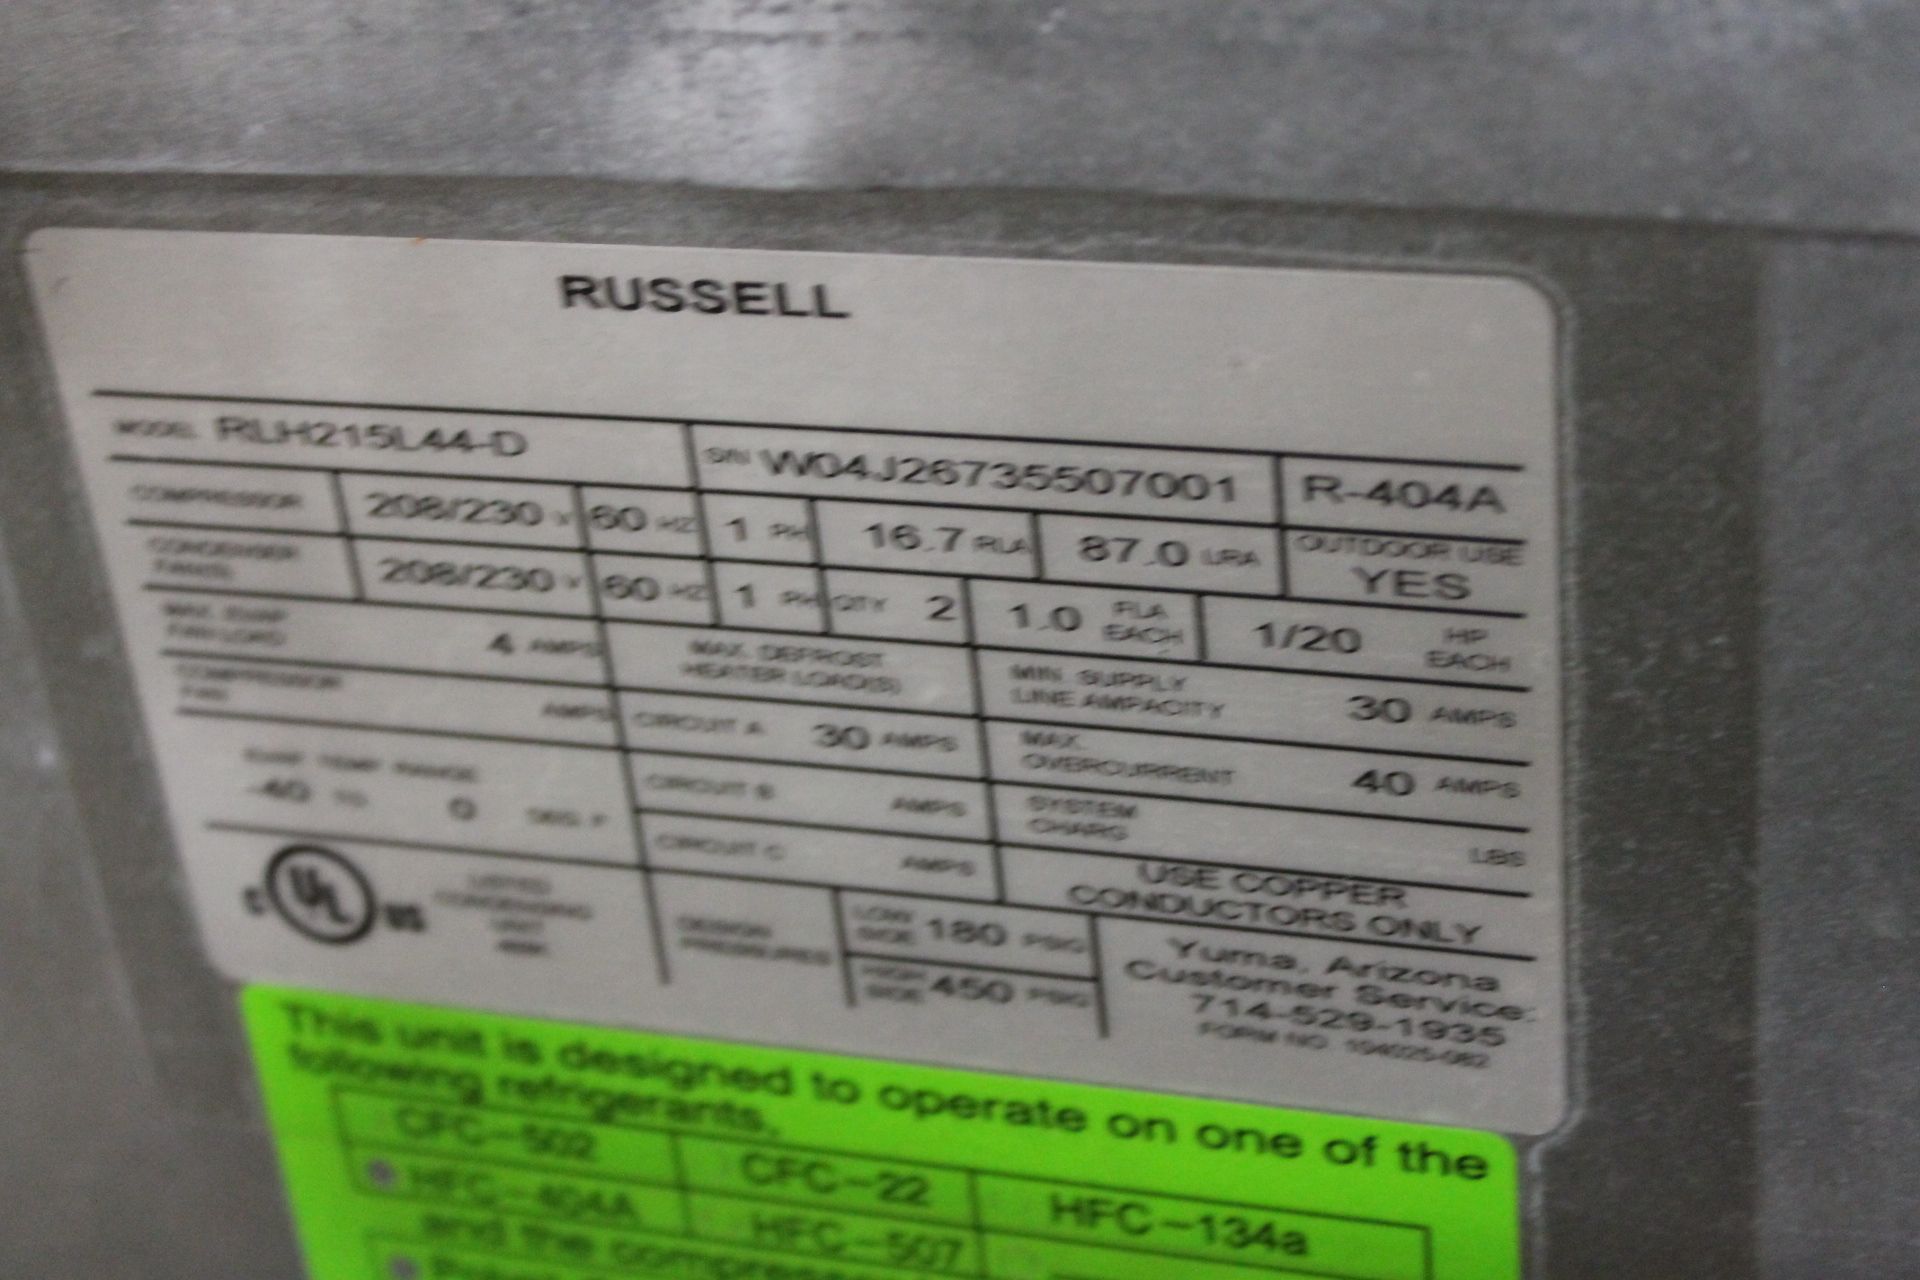 Used Walk-In Refrigeration - Image 3 of 3